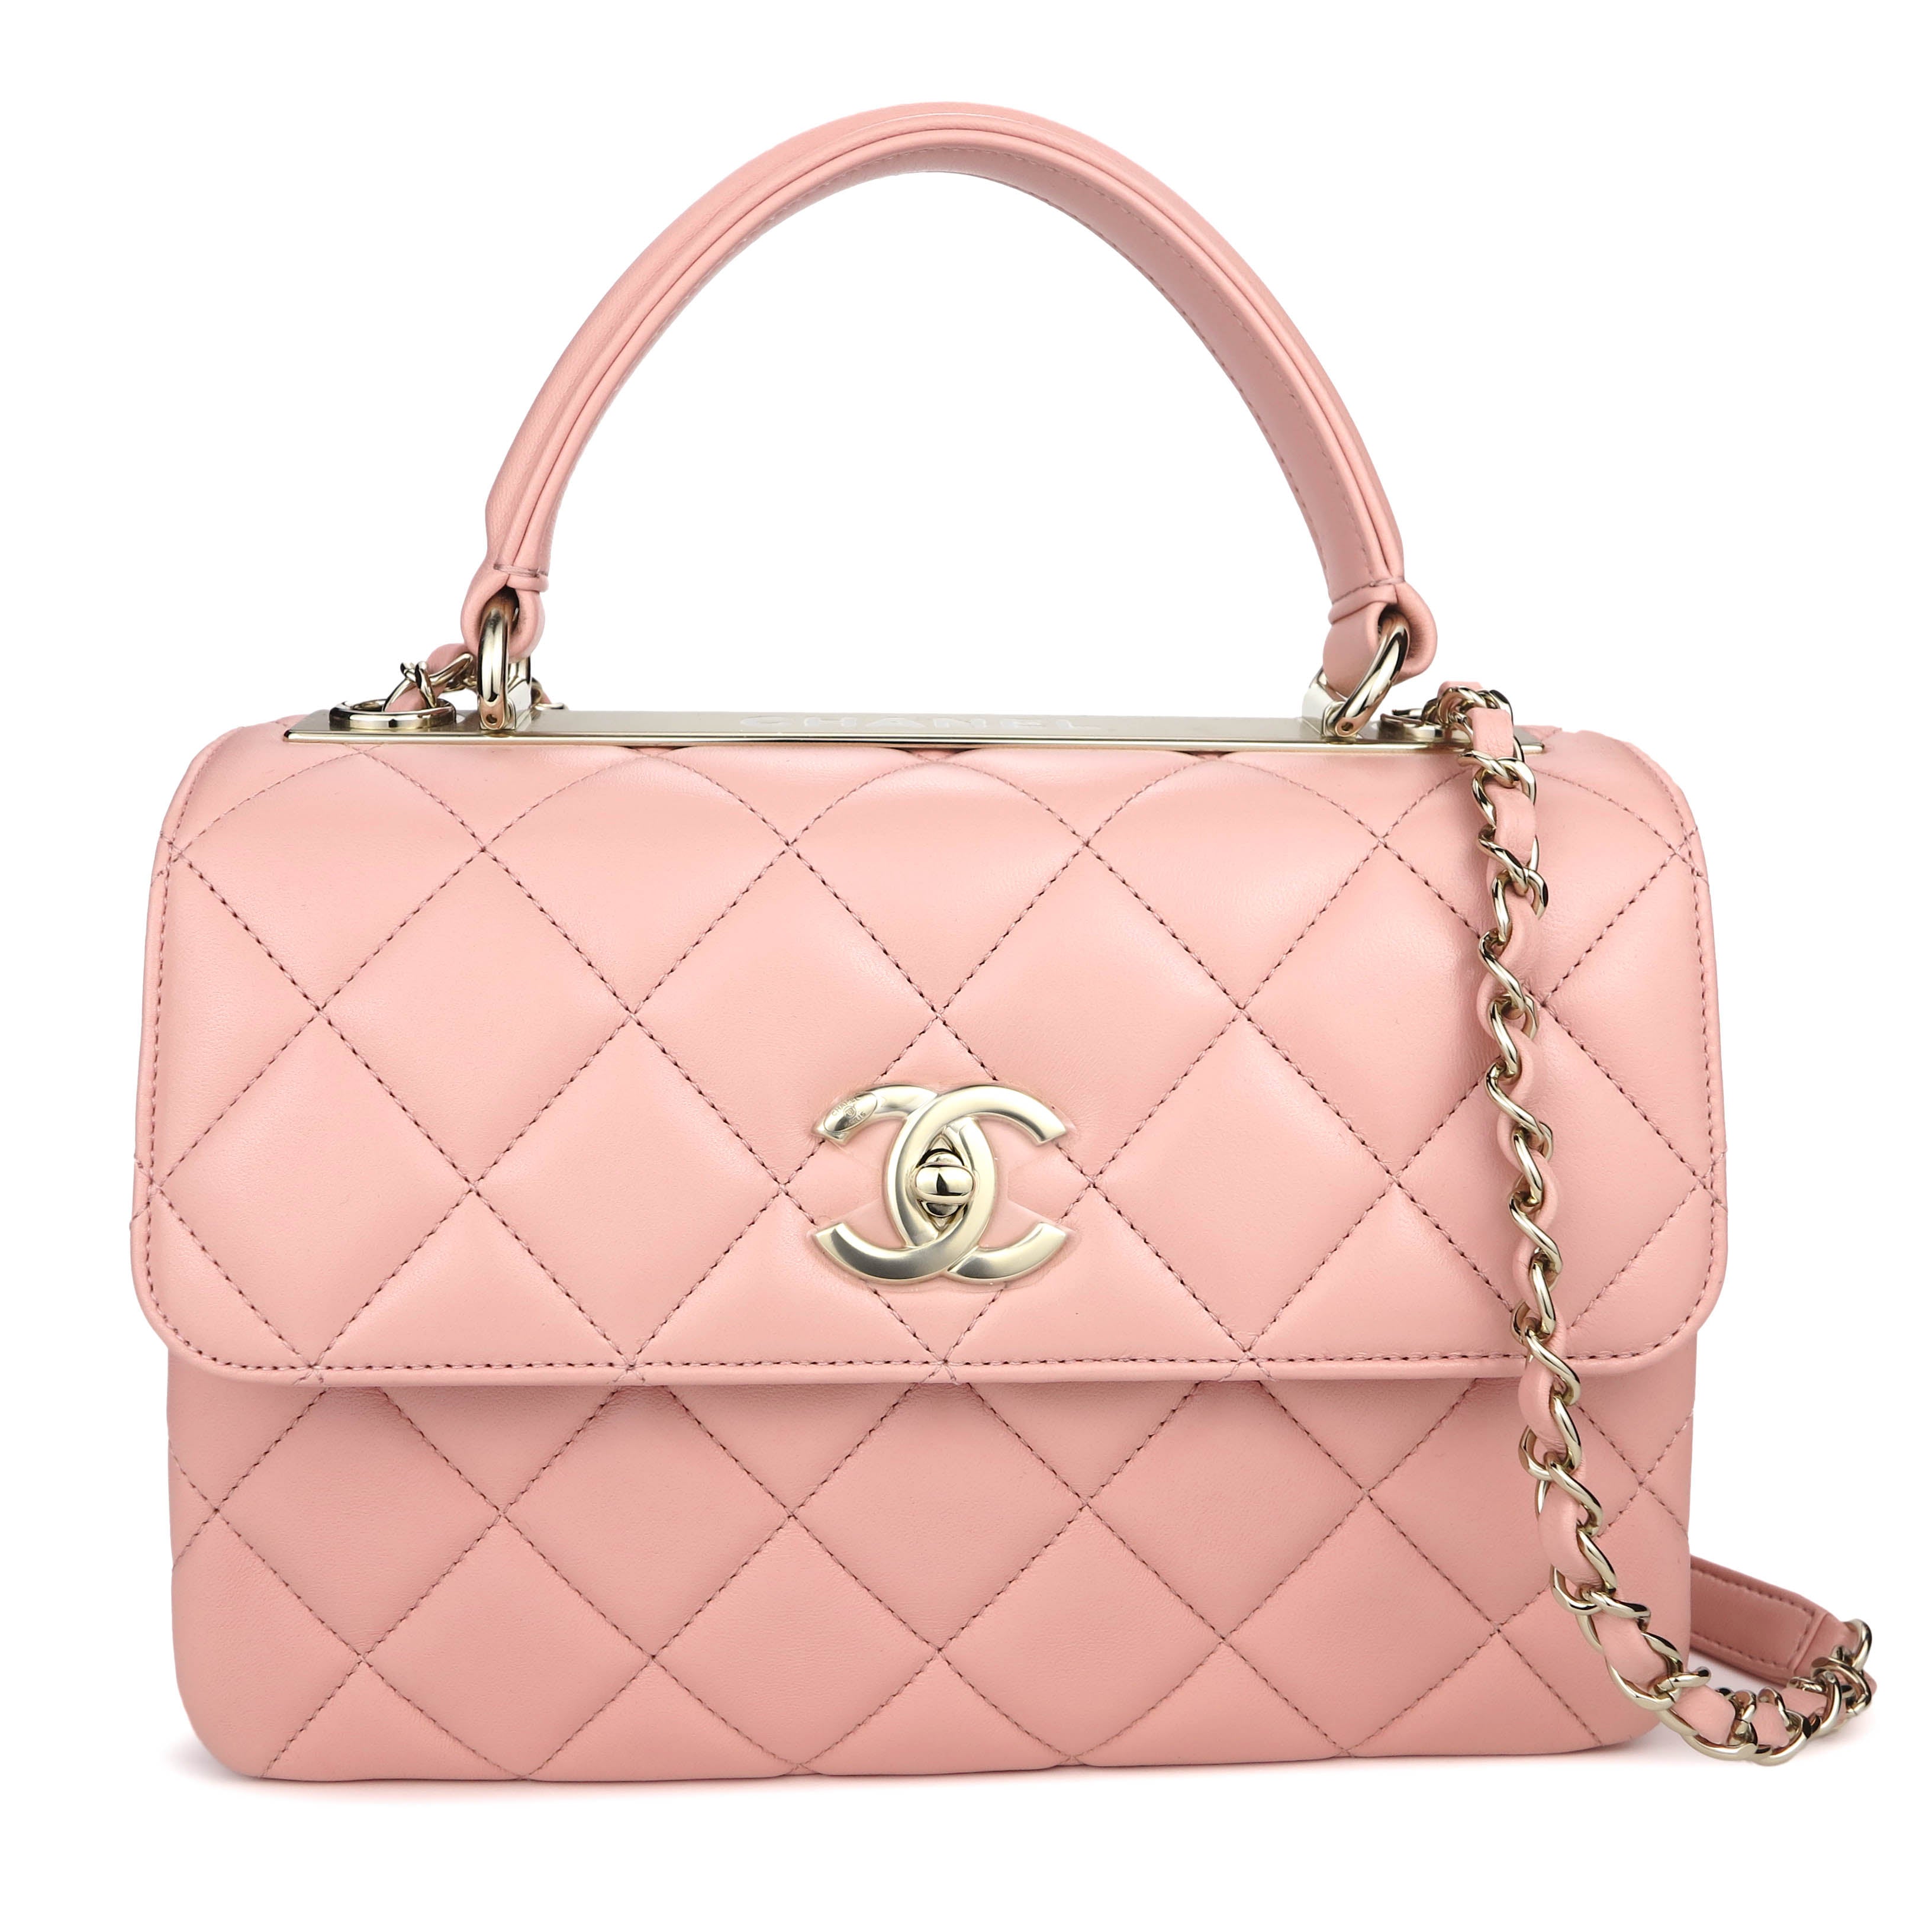 CHANEL Small Trendy CC Flap Bag with Top Handle in Pink Lambskin